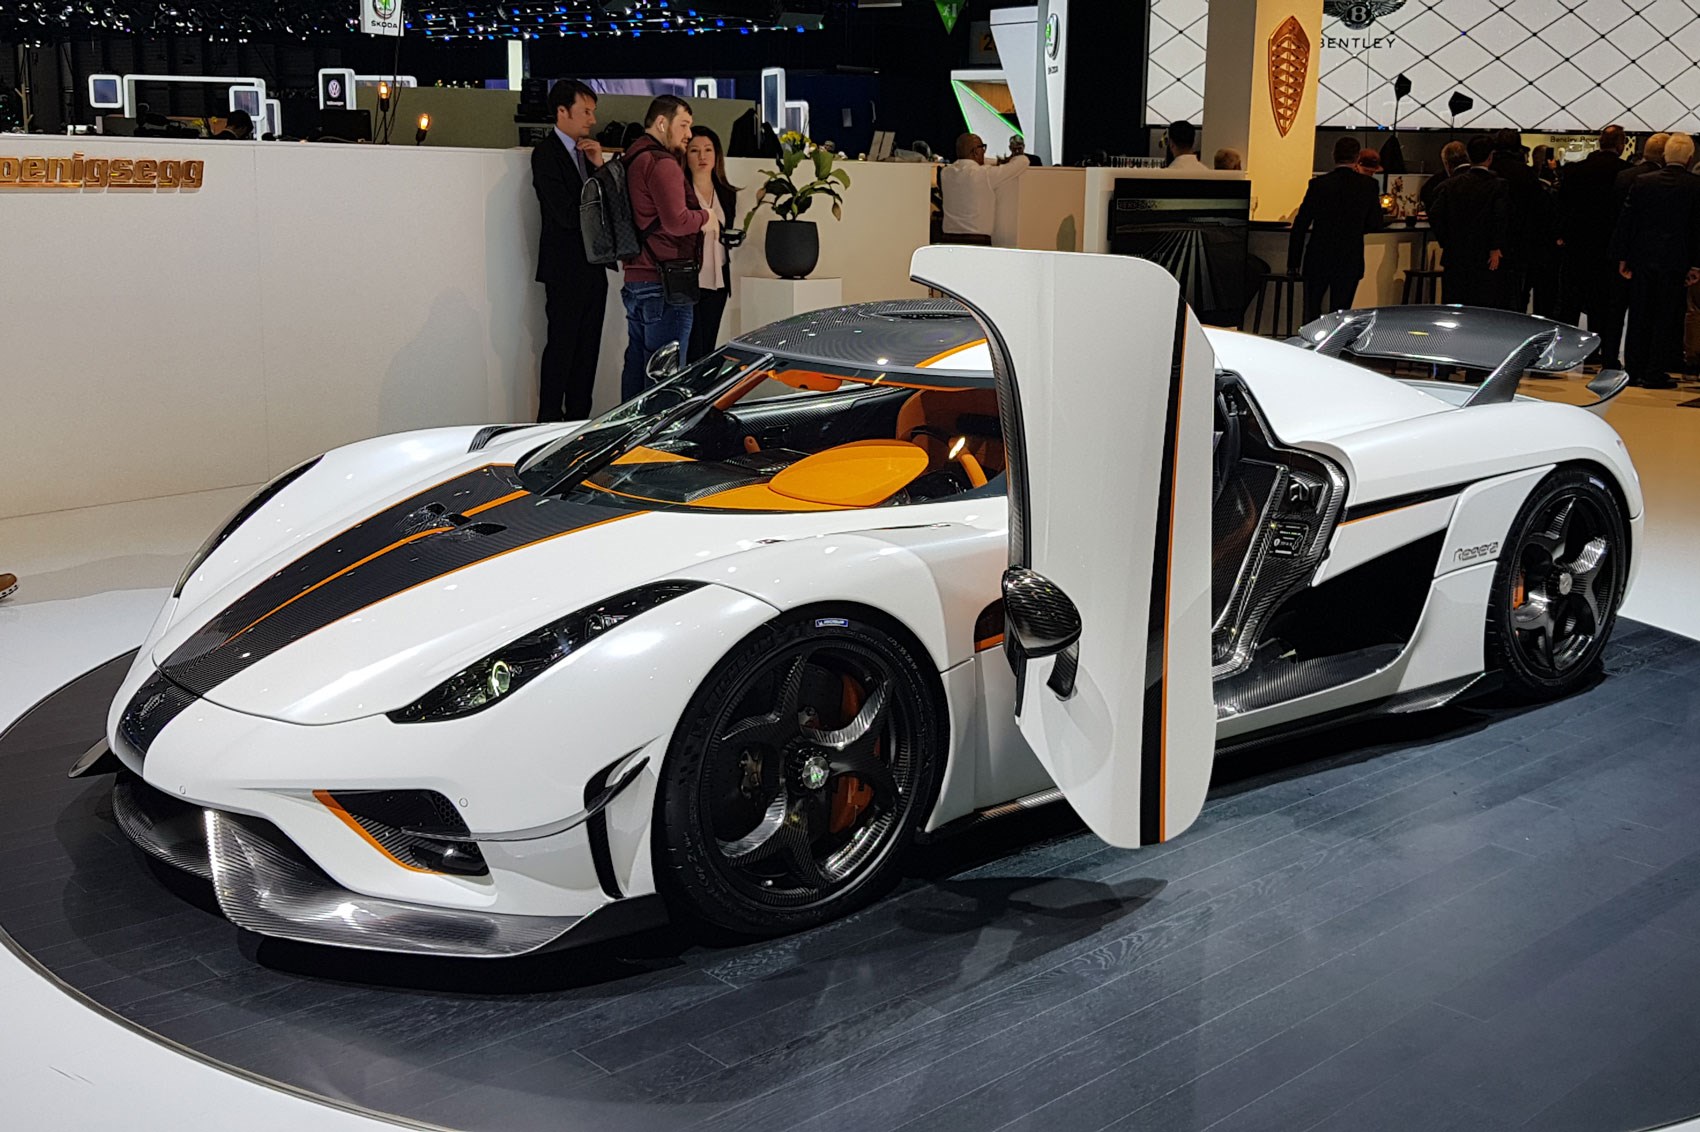 Koenigsegg confirms Agera RS replacement is coming in 2019 ...